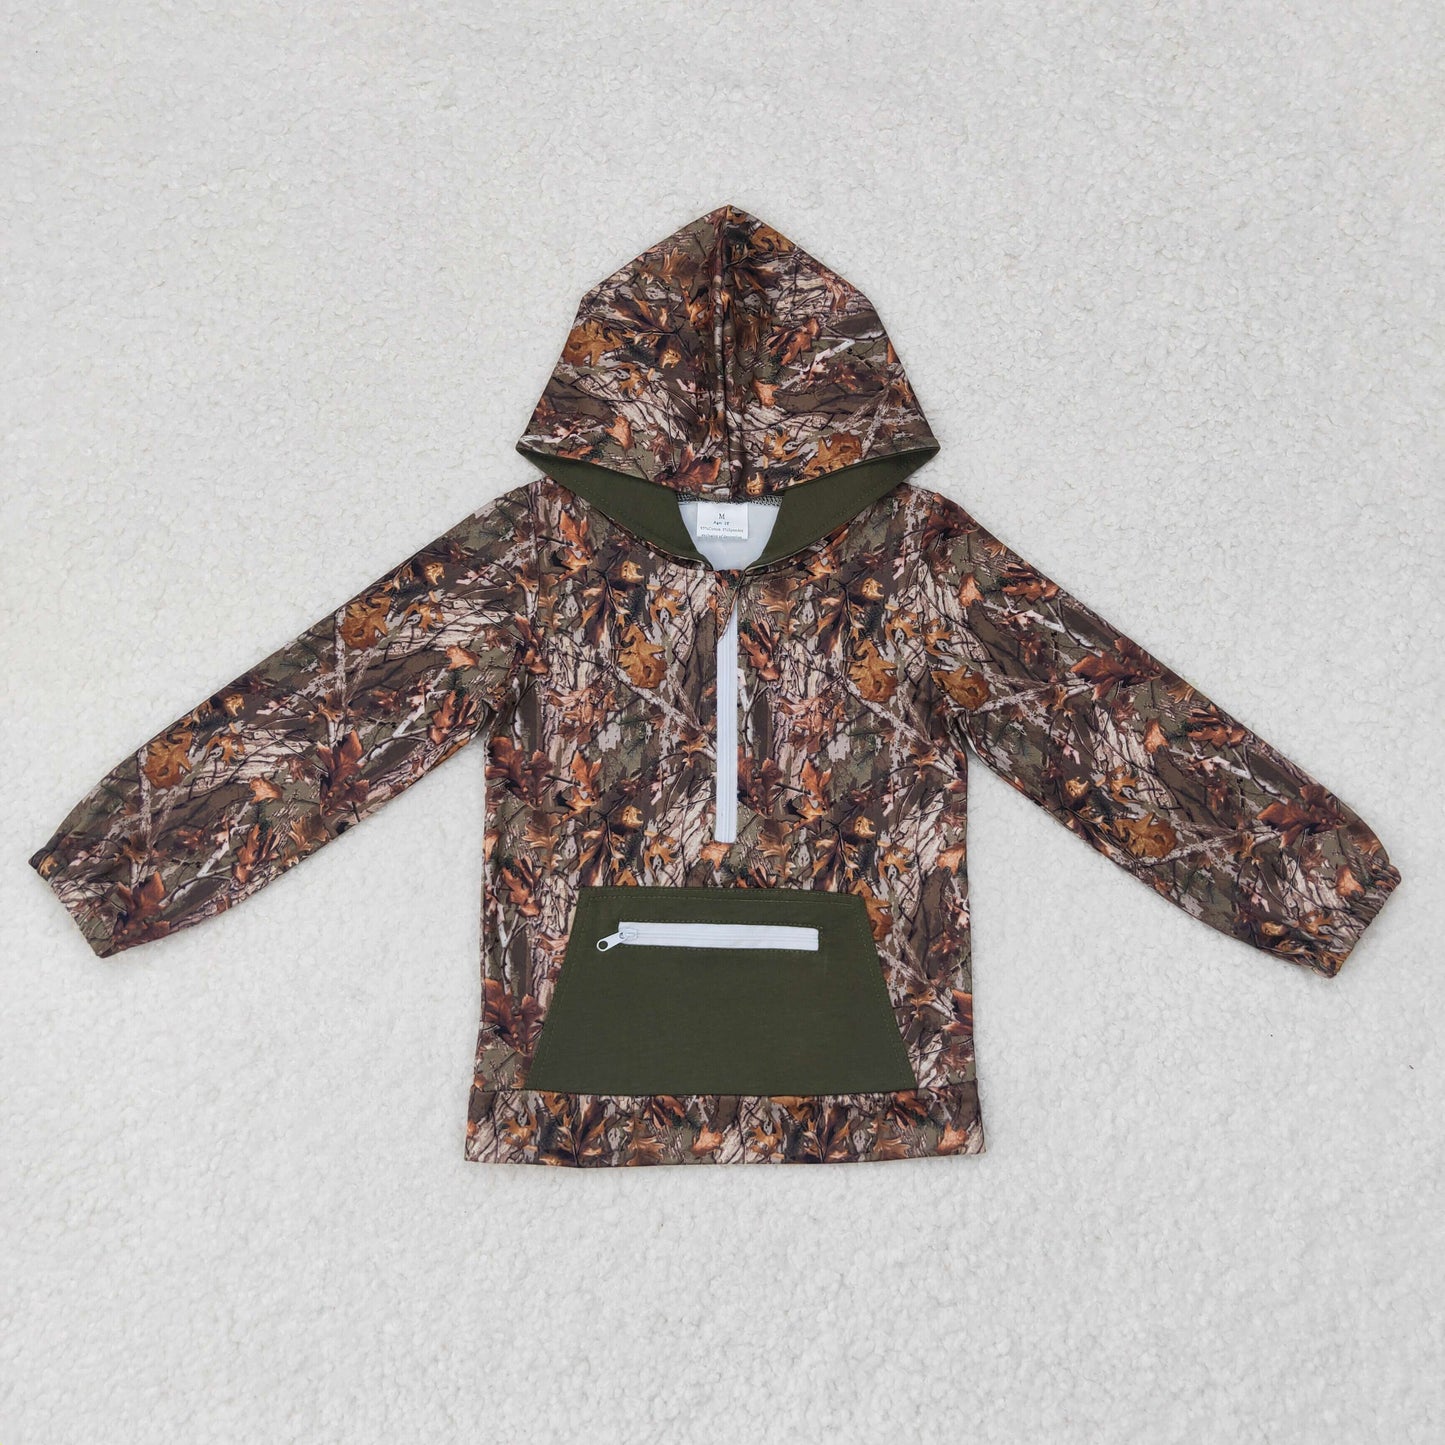 rts no moq BT0756 Leaf and branch camouflage zipper pocket hooded long-sleeved top